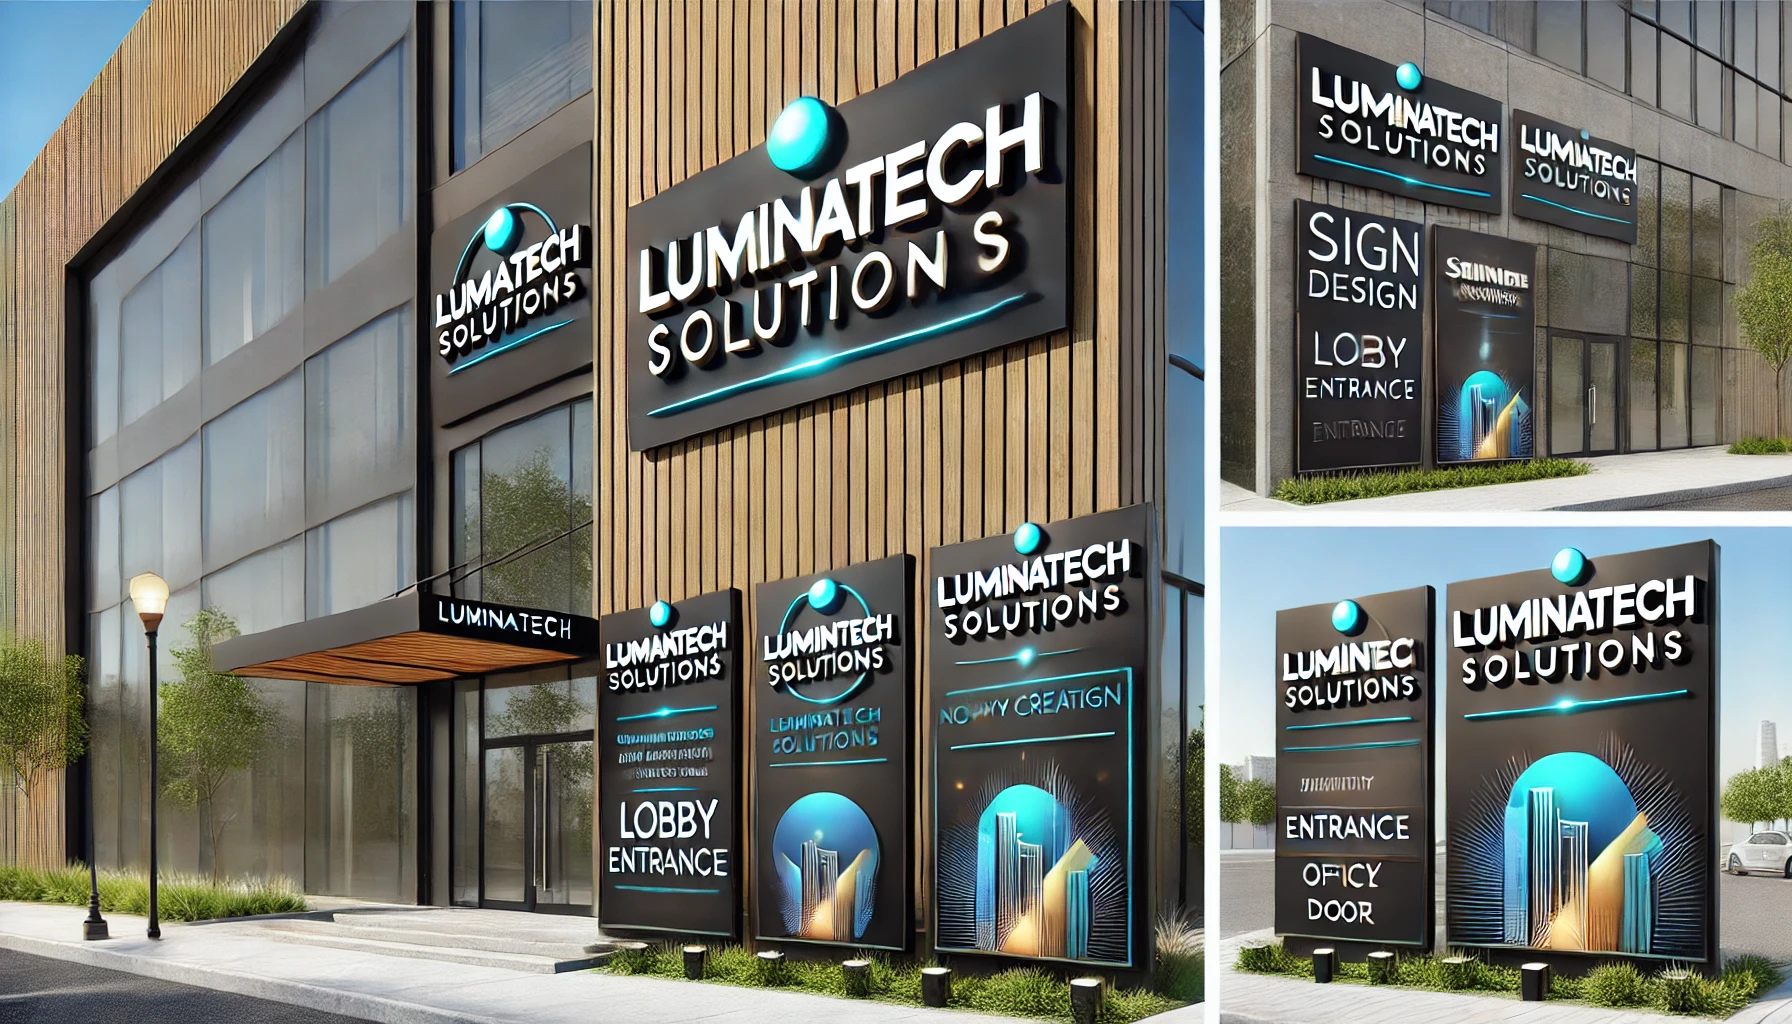 Sign design portfolio showcasing a variety of signage for a fictitious company, including storefront signs, directional signs, and promotional banners, demonstrating clear and attractive visual communication.